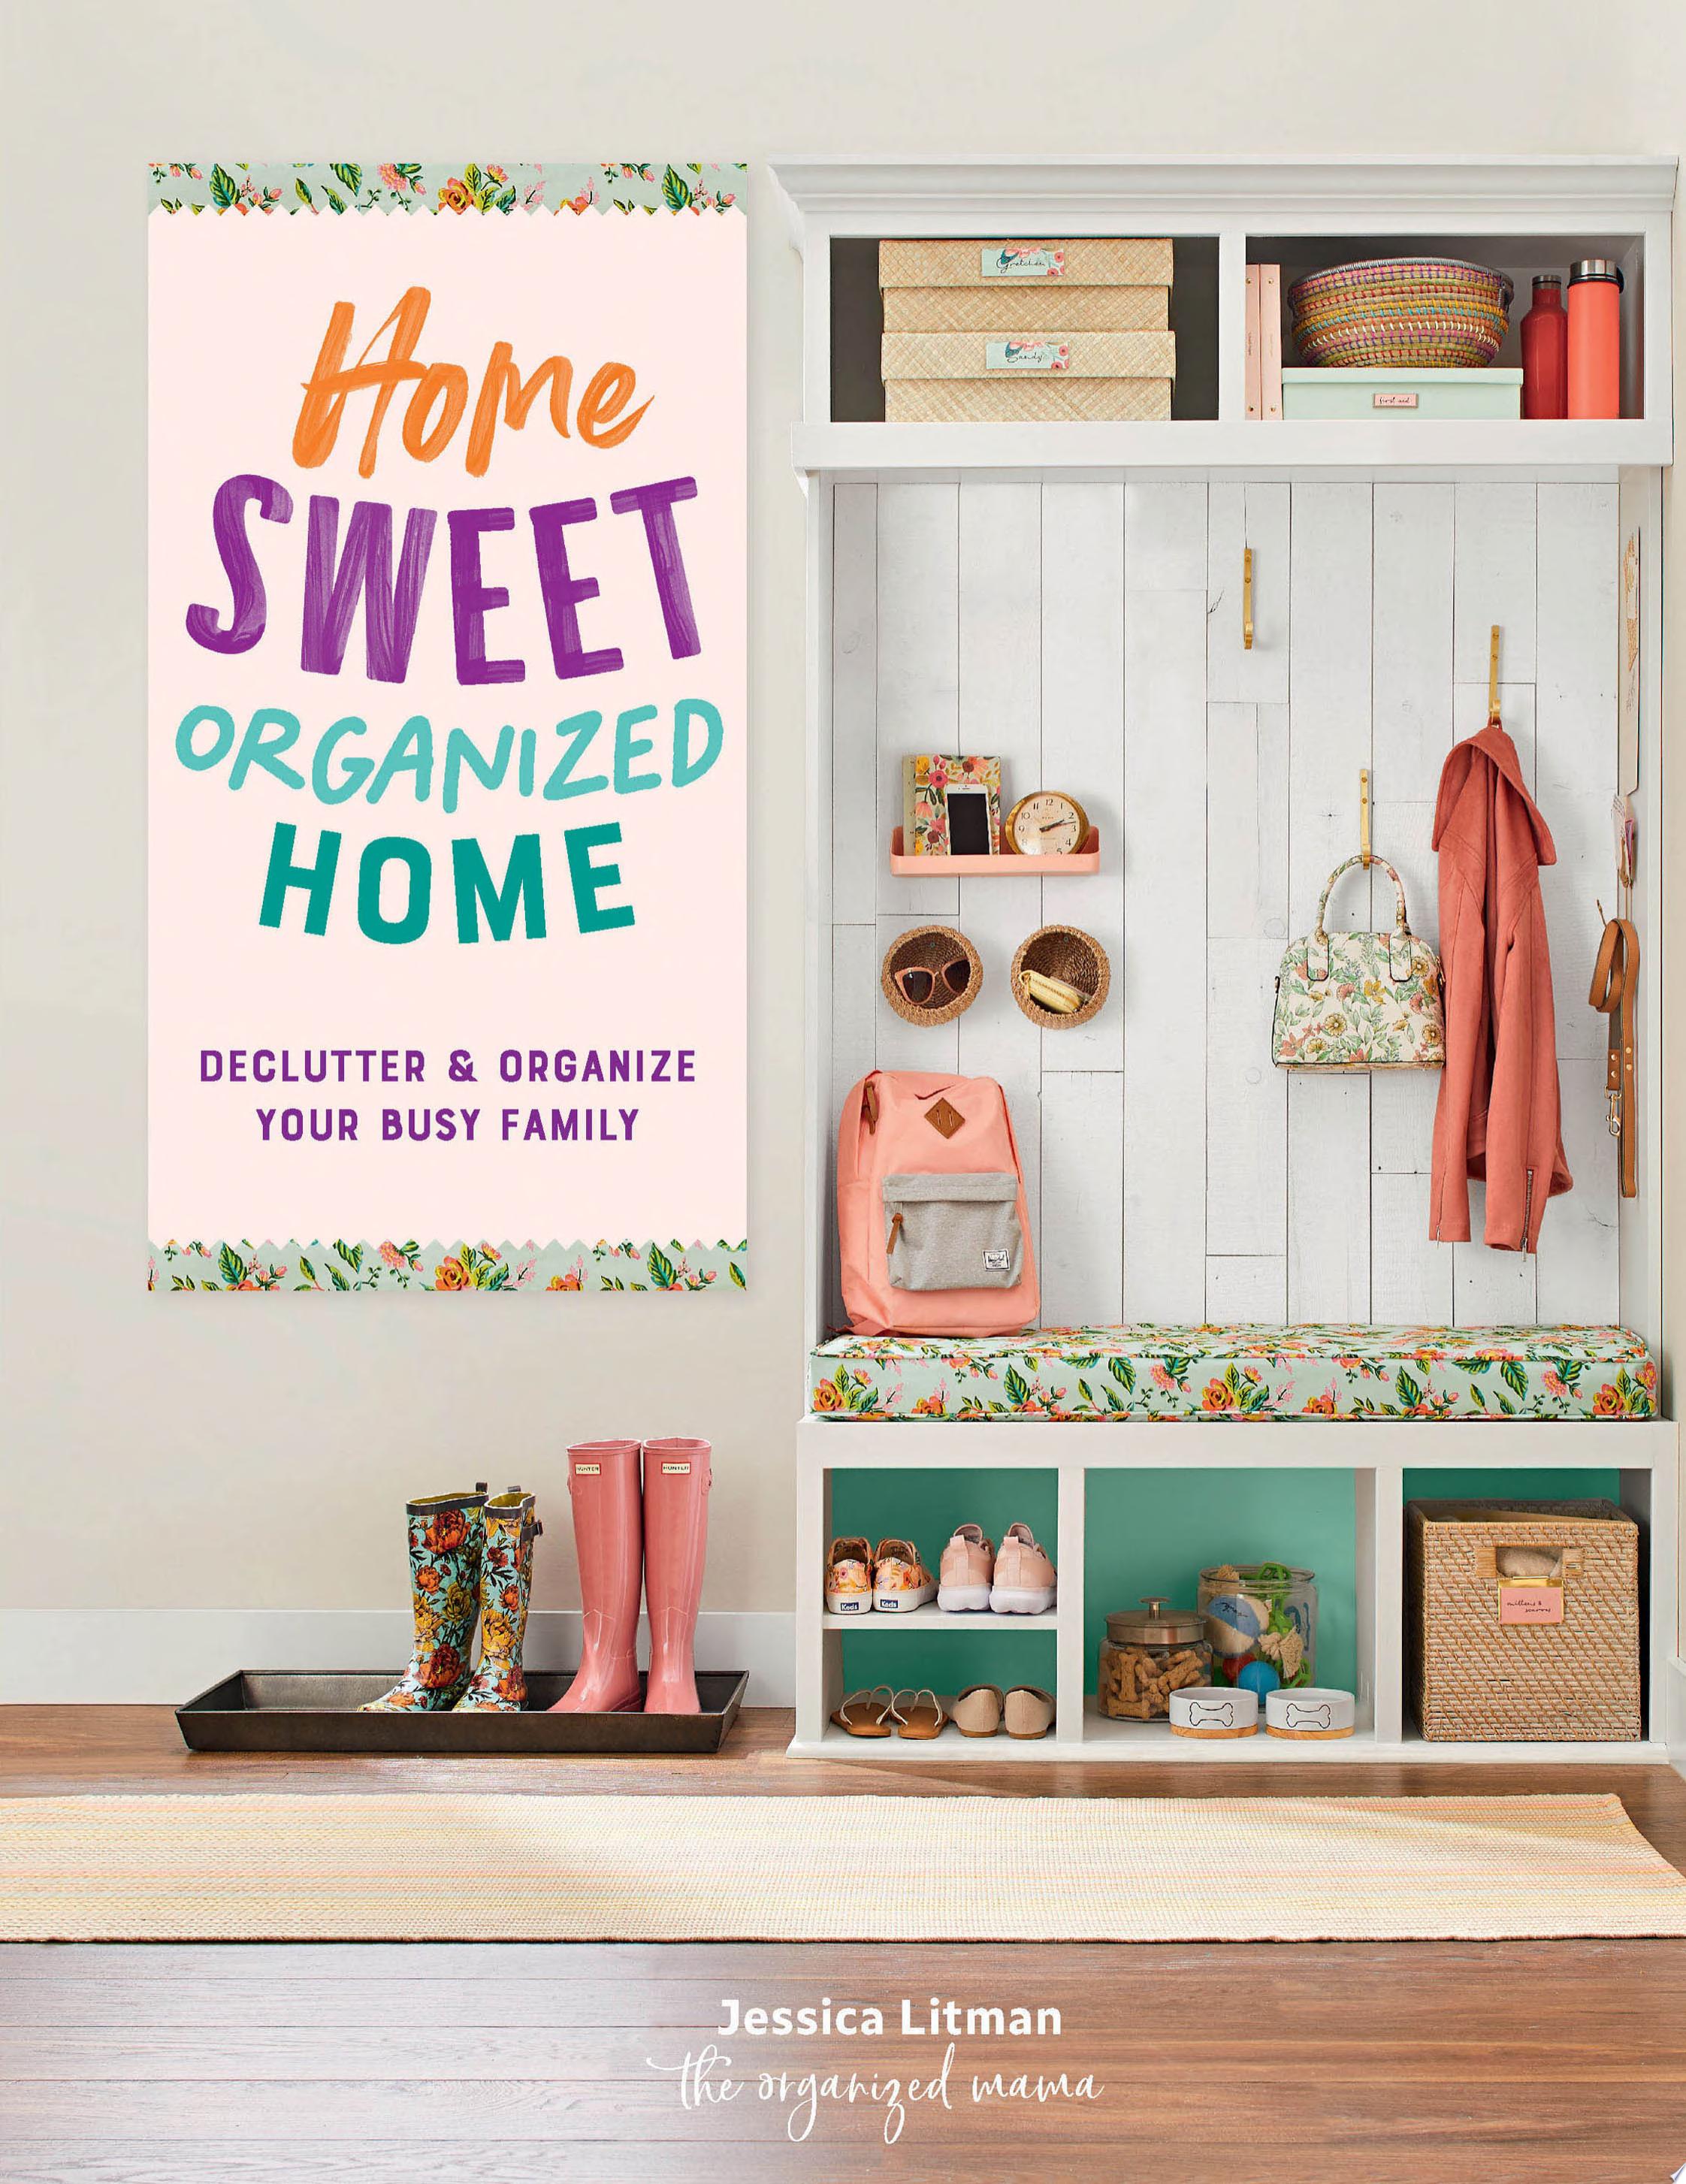 Image for "Home Sweet Organized Home"